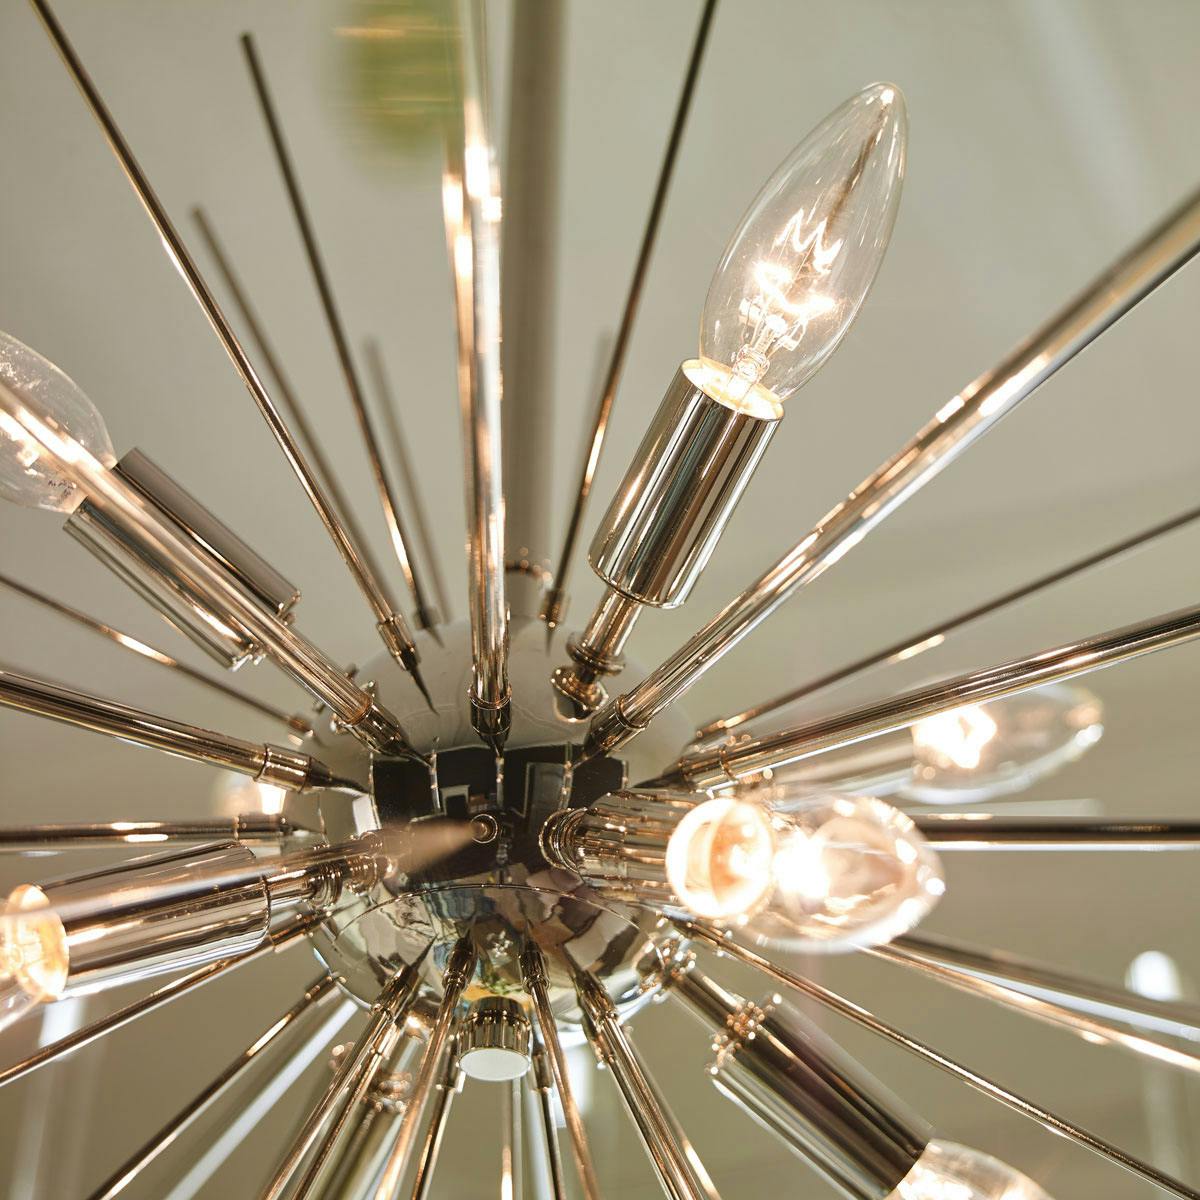 Close up of the chandelier from the Eris lighting collection